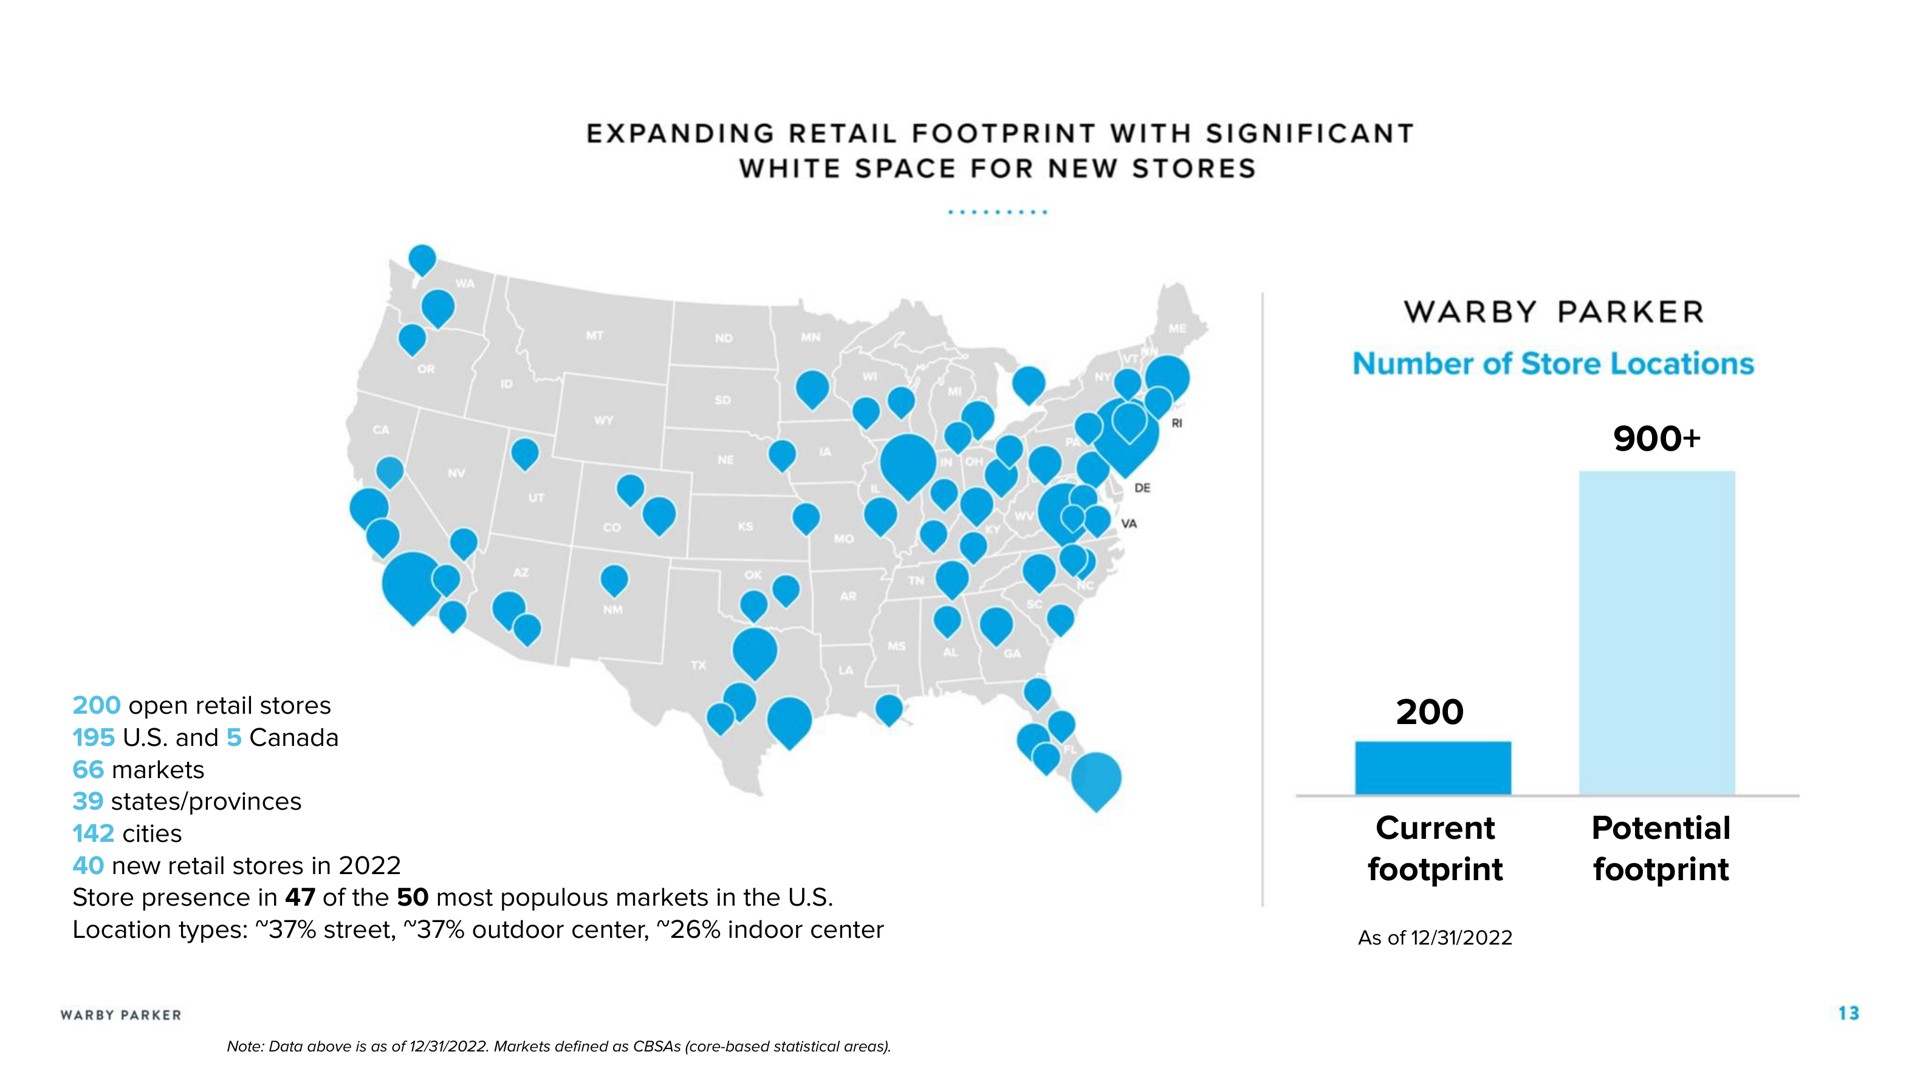 current footprint potential footprint expanding retail with significant white space for new stores open retail stores new retail stores in location types street outdoor center indoor center parker number of store locations | Warby Parker